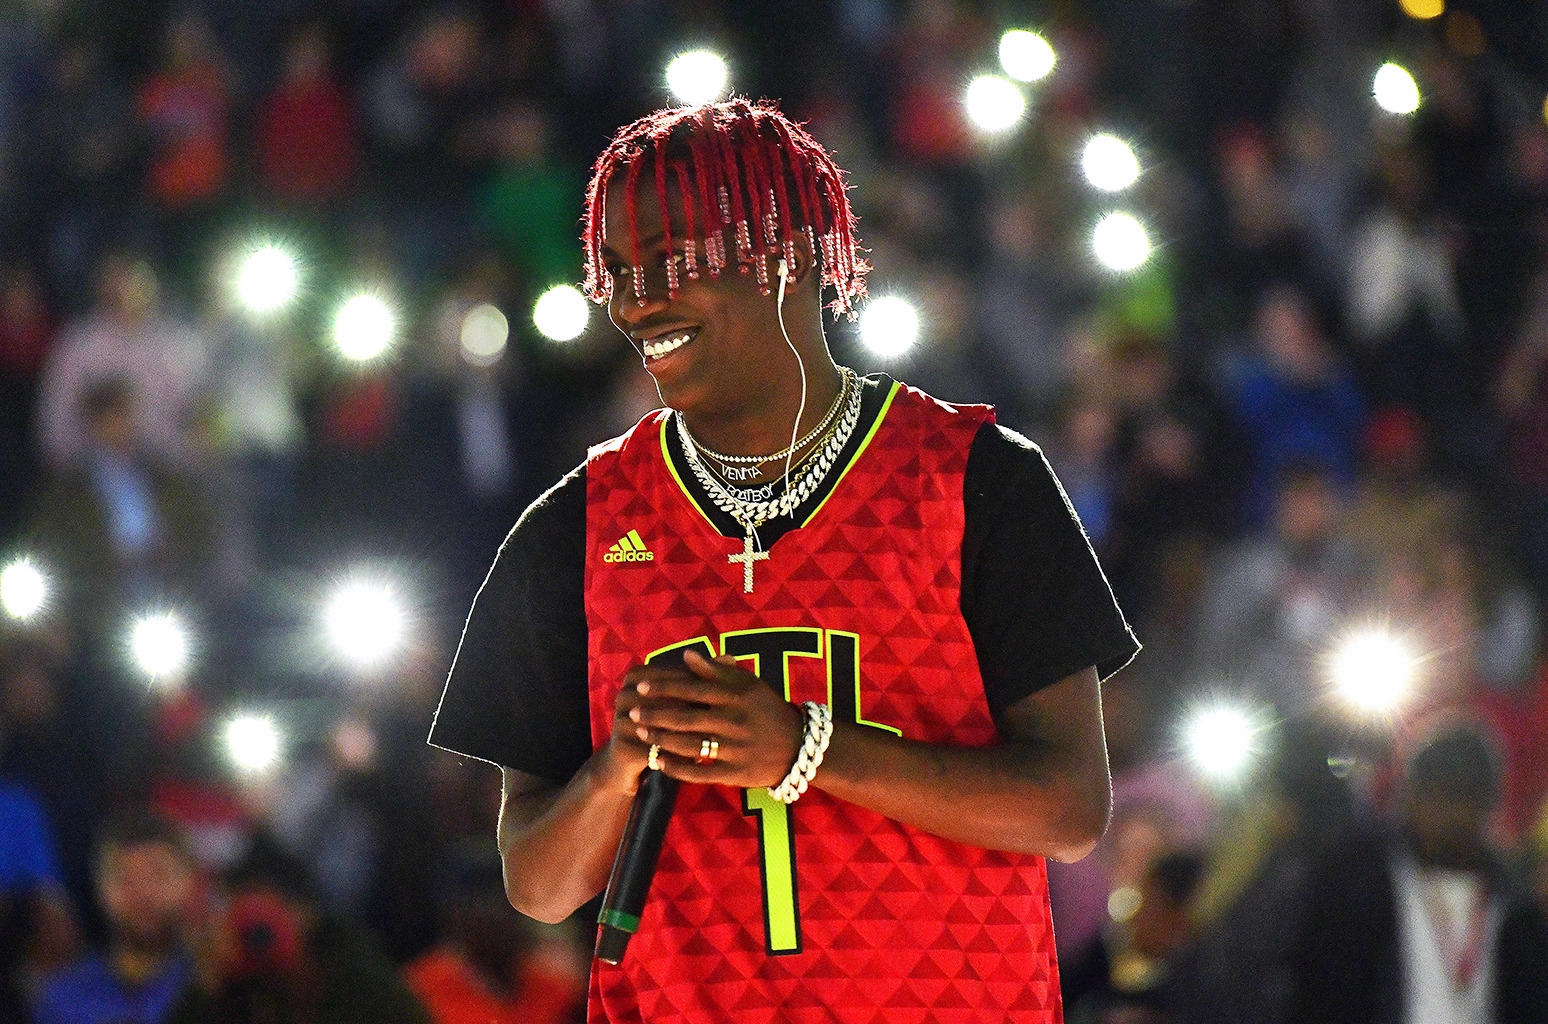 Lil Yachty’s New Album ‘Let’s Start Here’ Gets A New Release Date